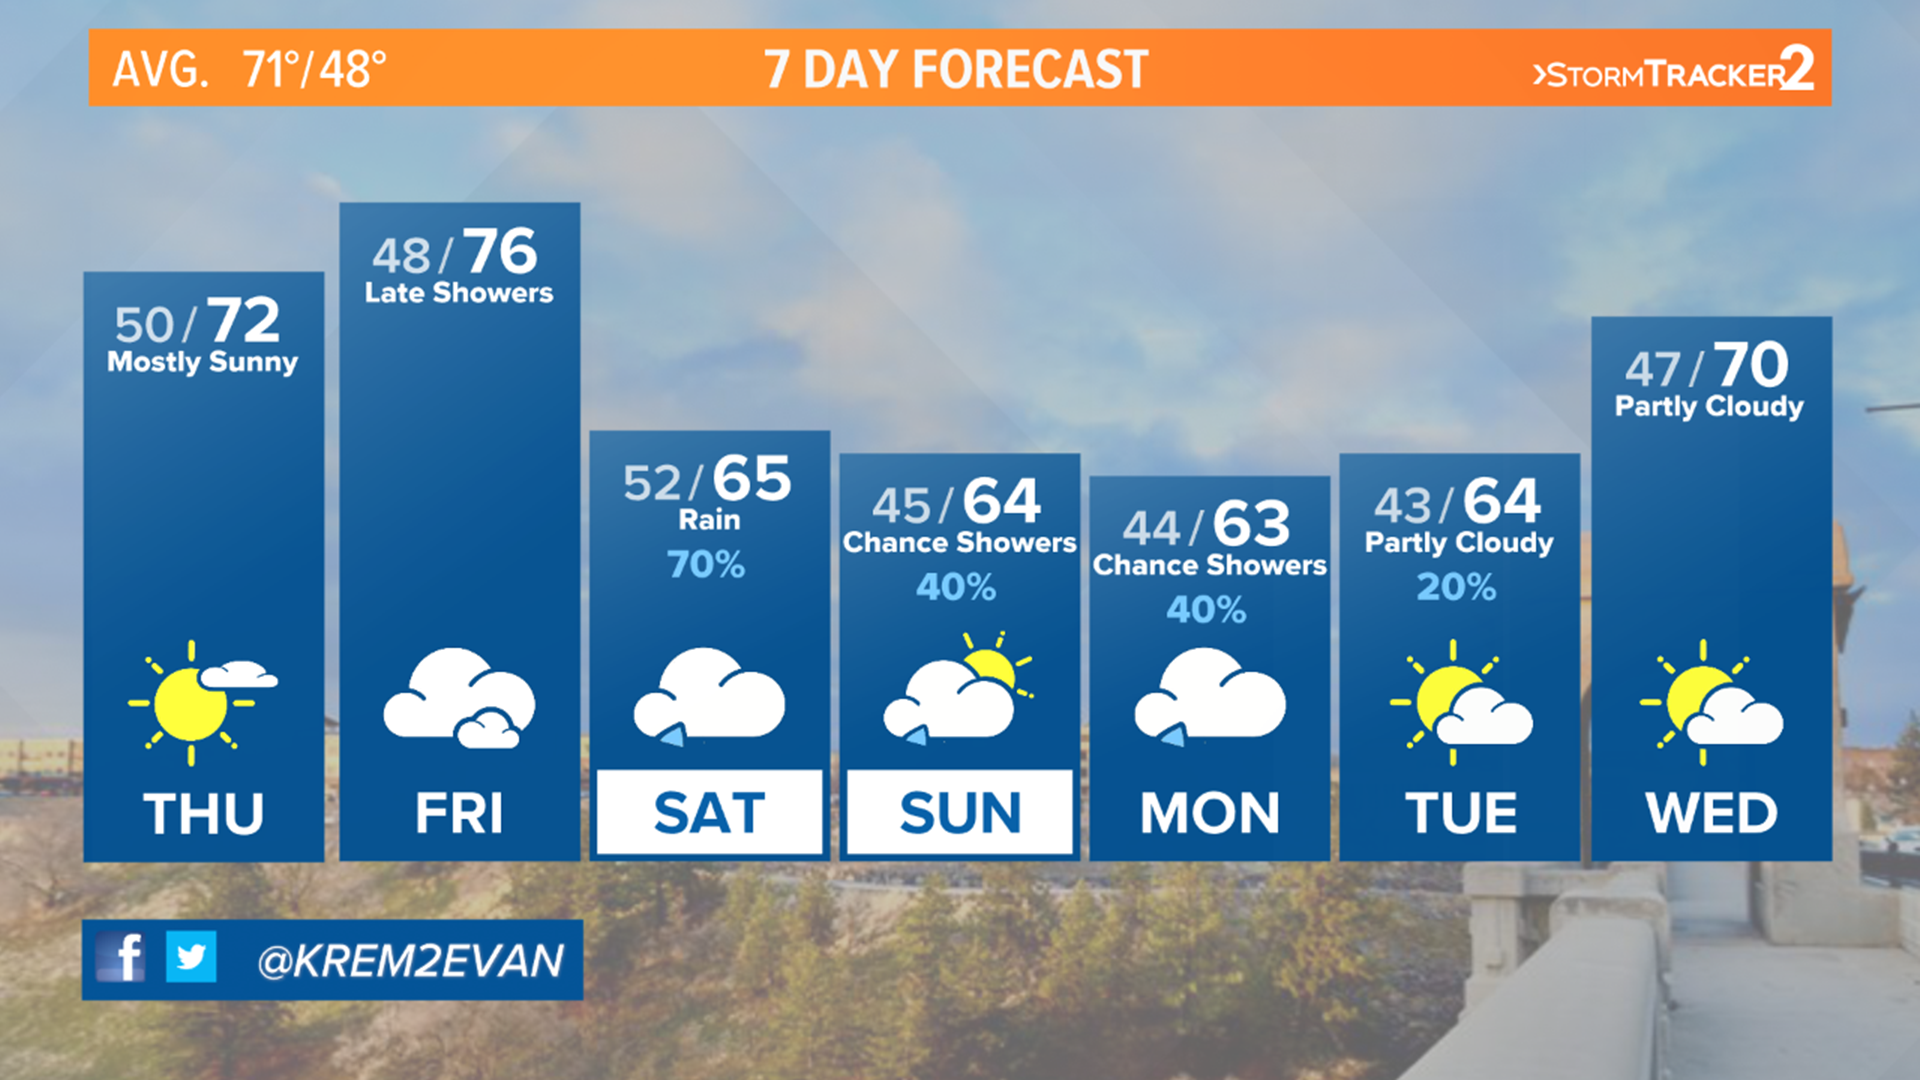 Temperatures warm through Friday but clouds build in anticipation for rain Friday evening.